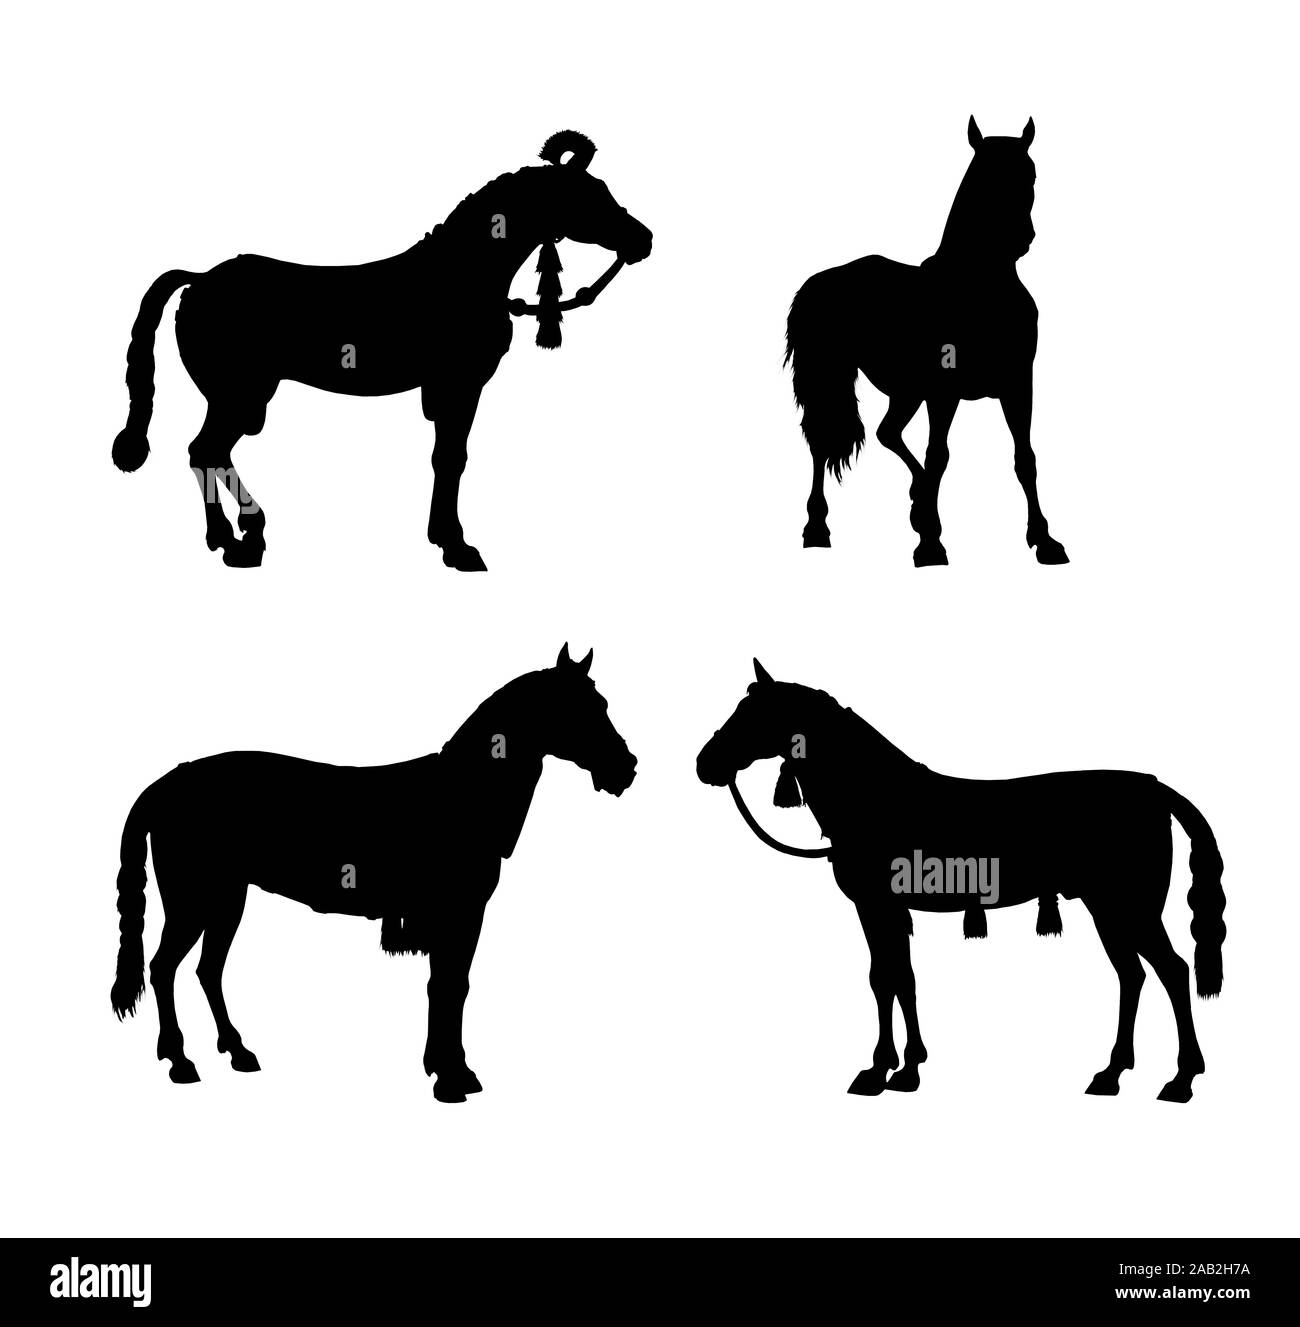 Military horses of ancient Persians and Assyrians. Armored horses silhouette set. Historical illustration. Stock Photo